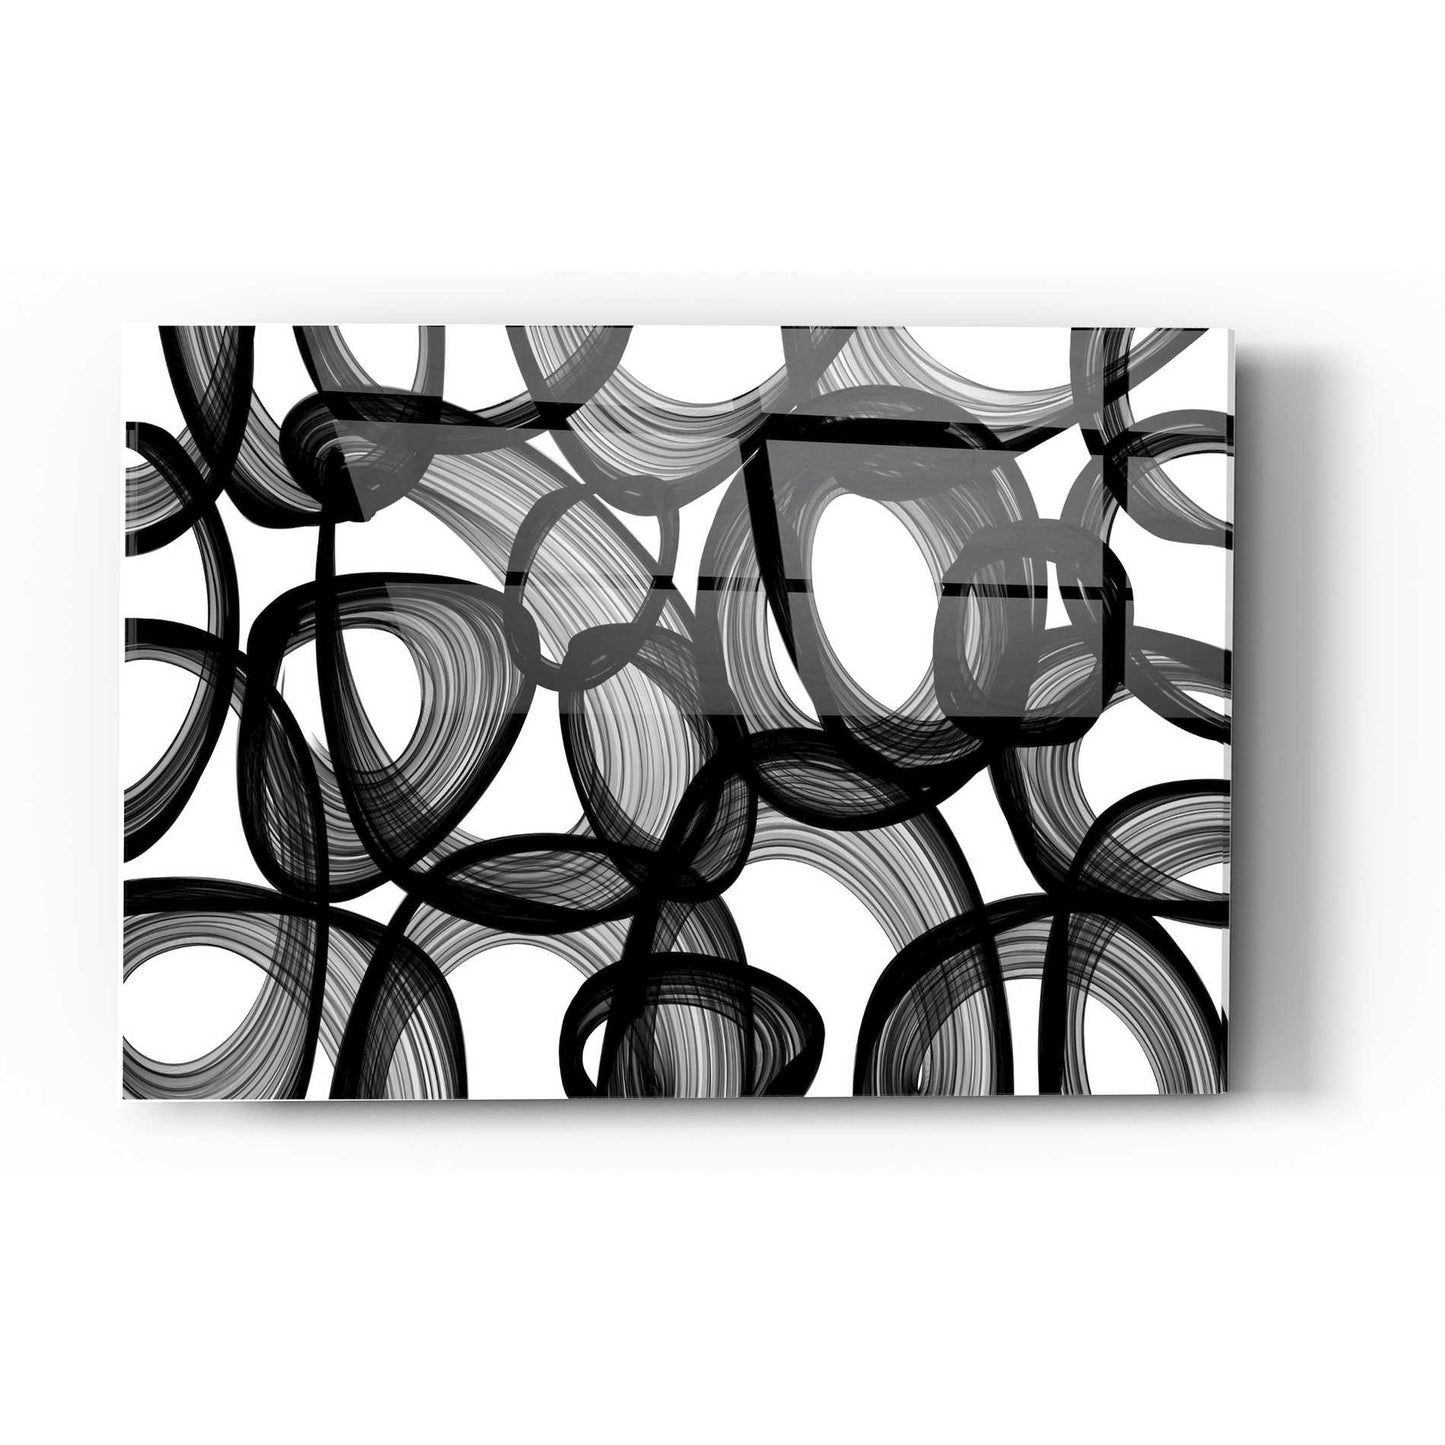 Epic Art 'Abstract Black and White 2015' by Irena Orlov, Acrylic Glass Wall Art,24x36